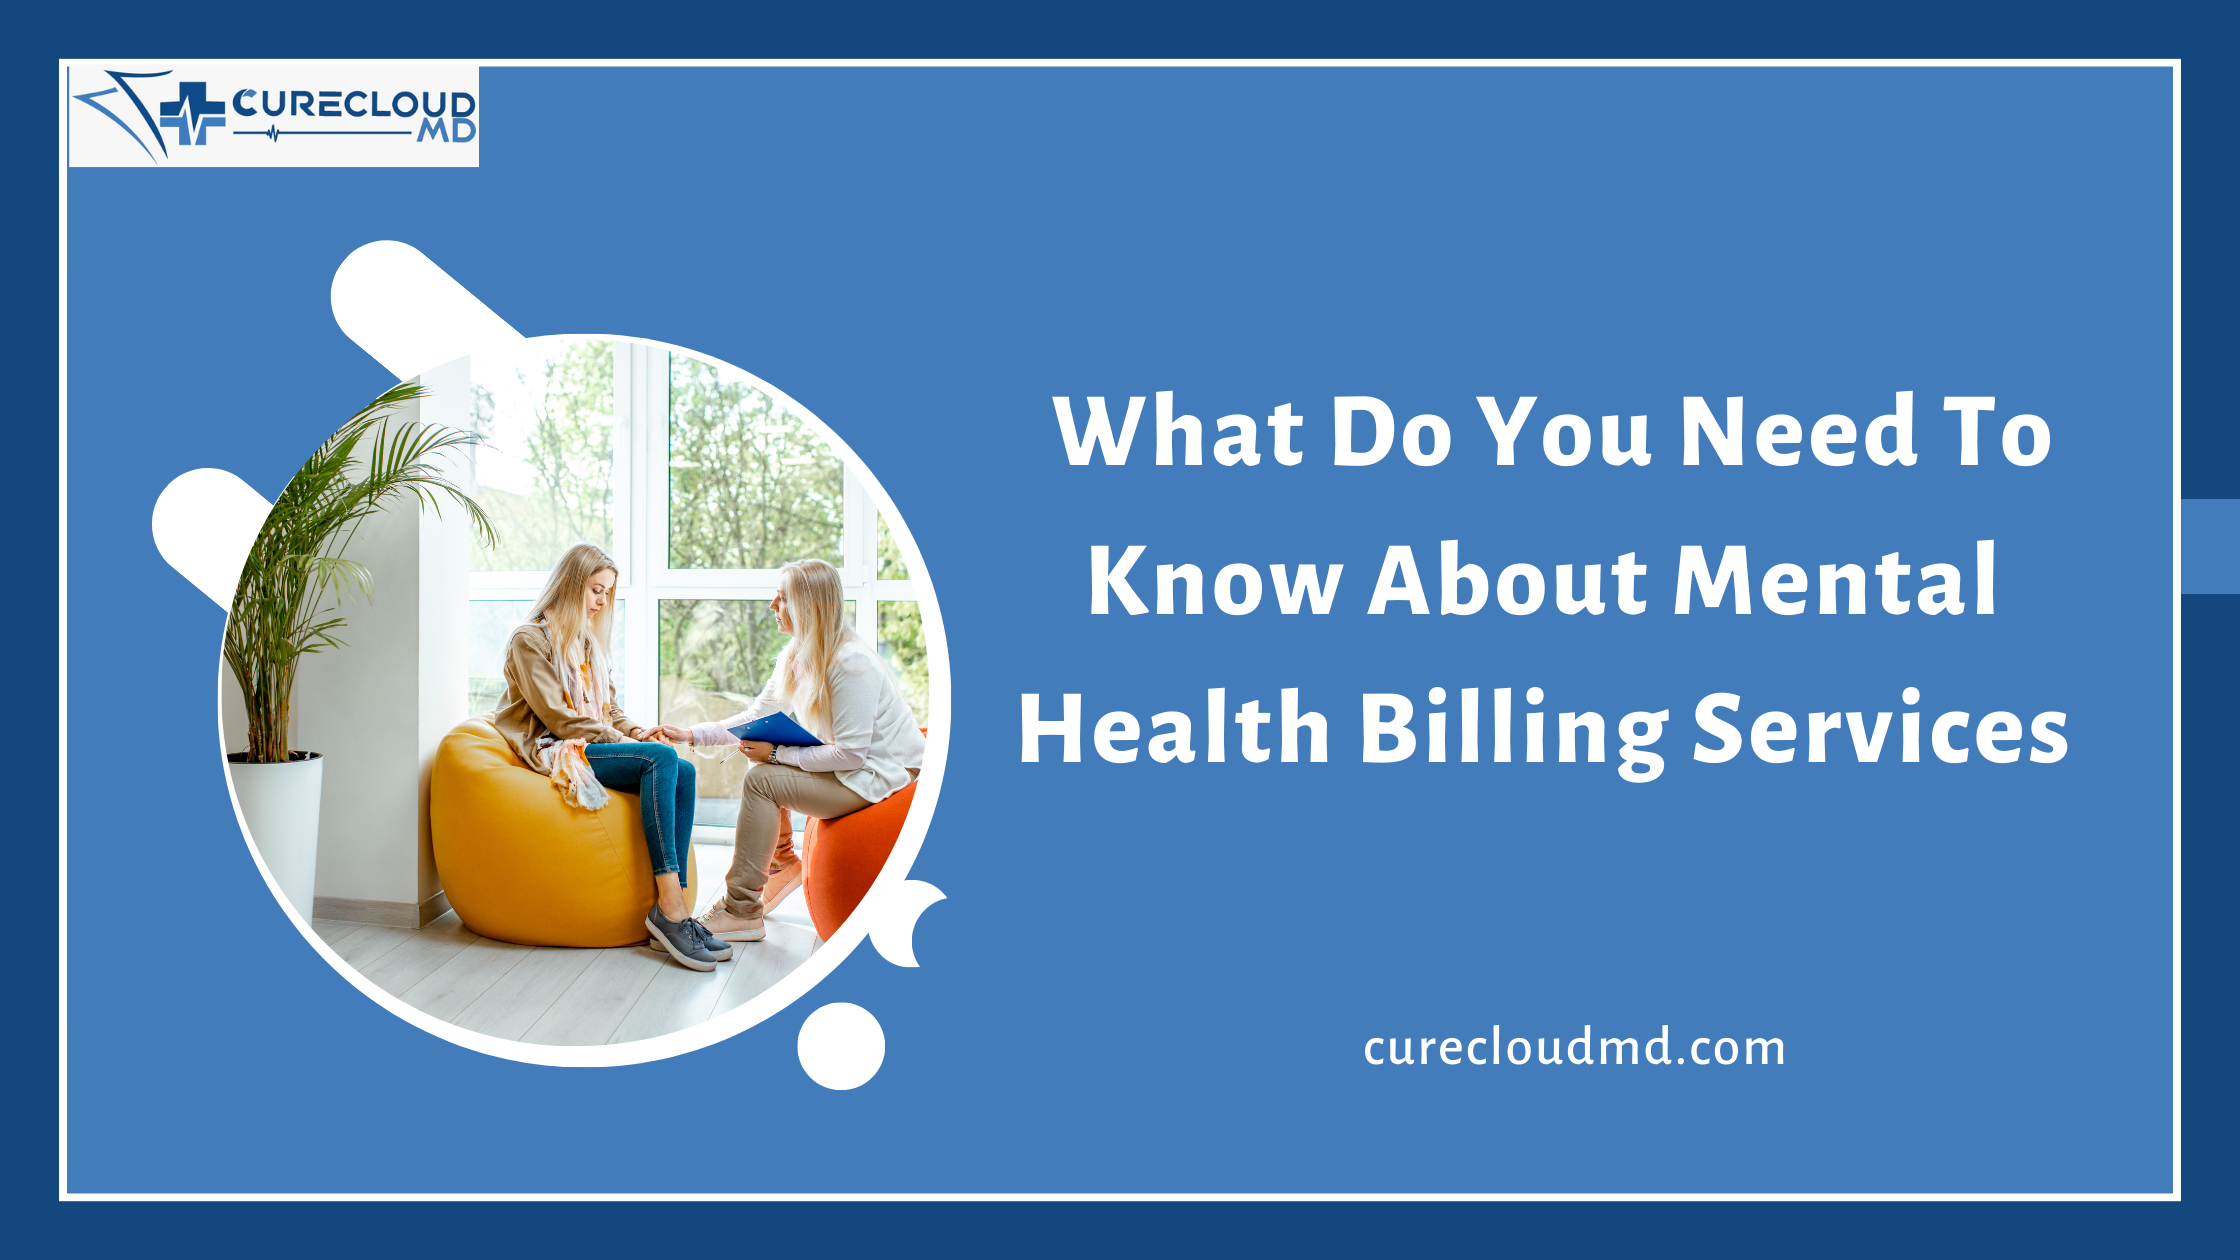 What Do You Need To Know About Mental Health Billing Services